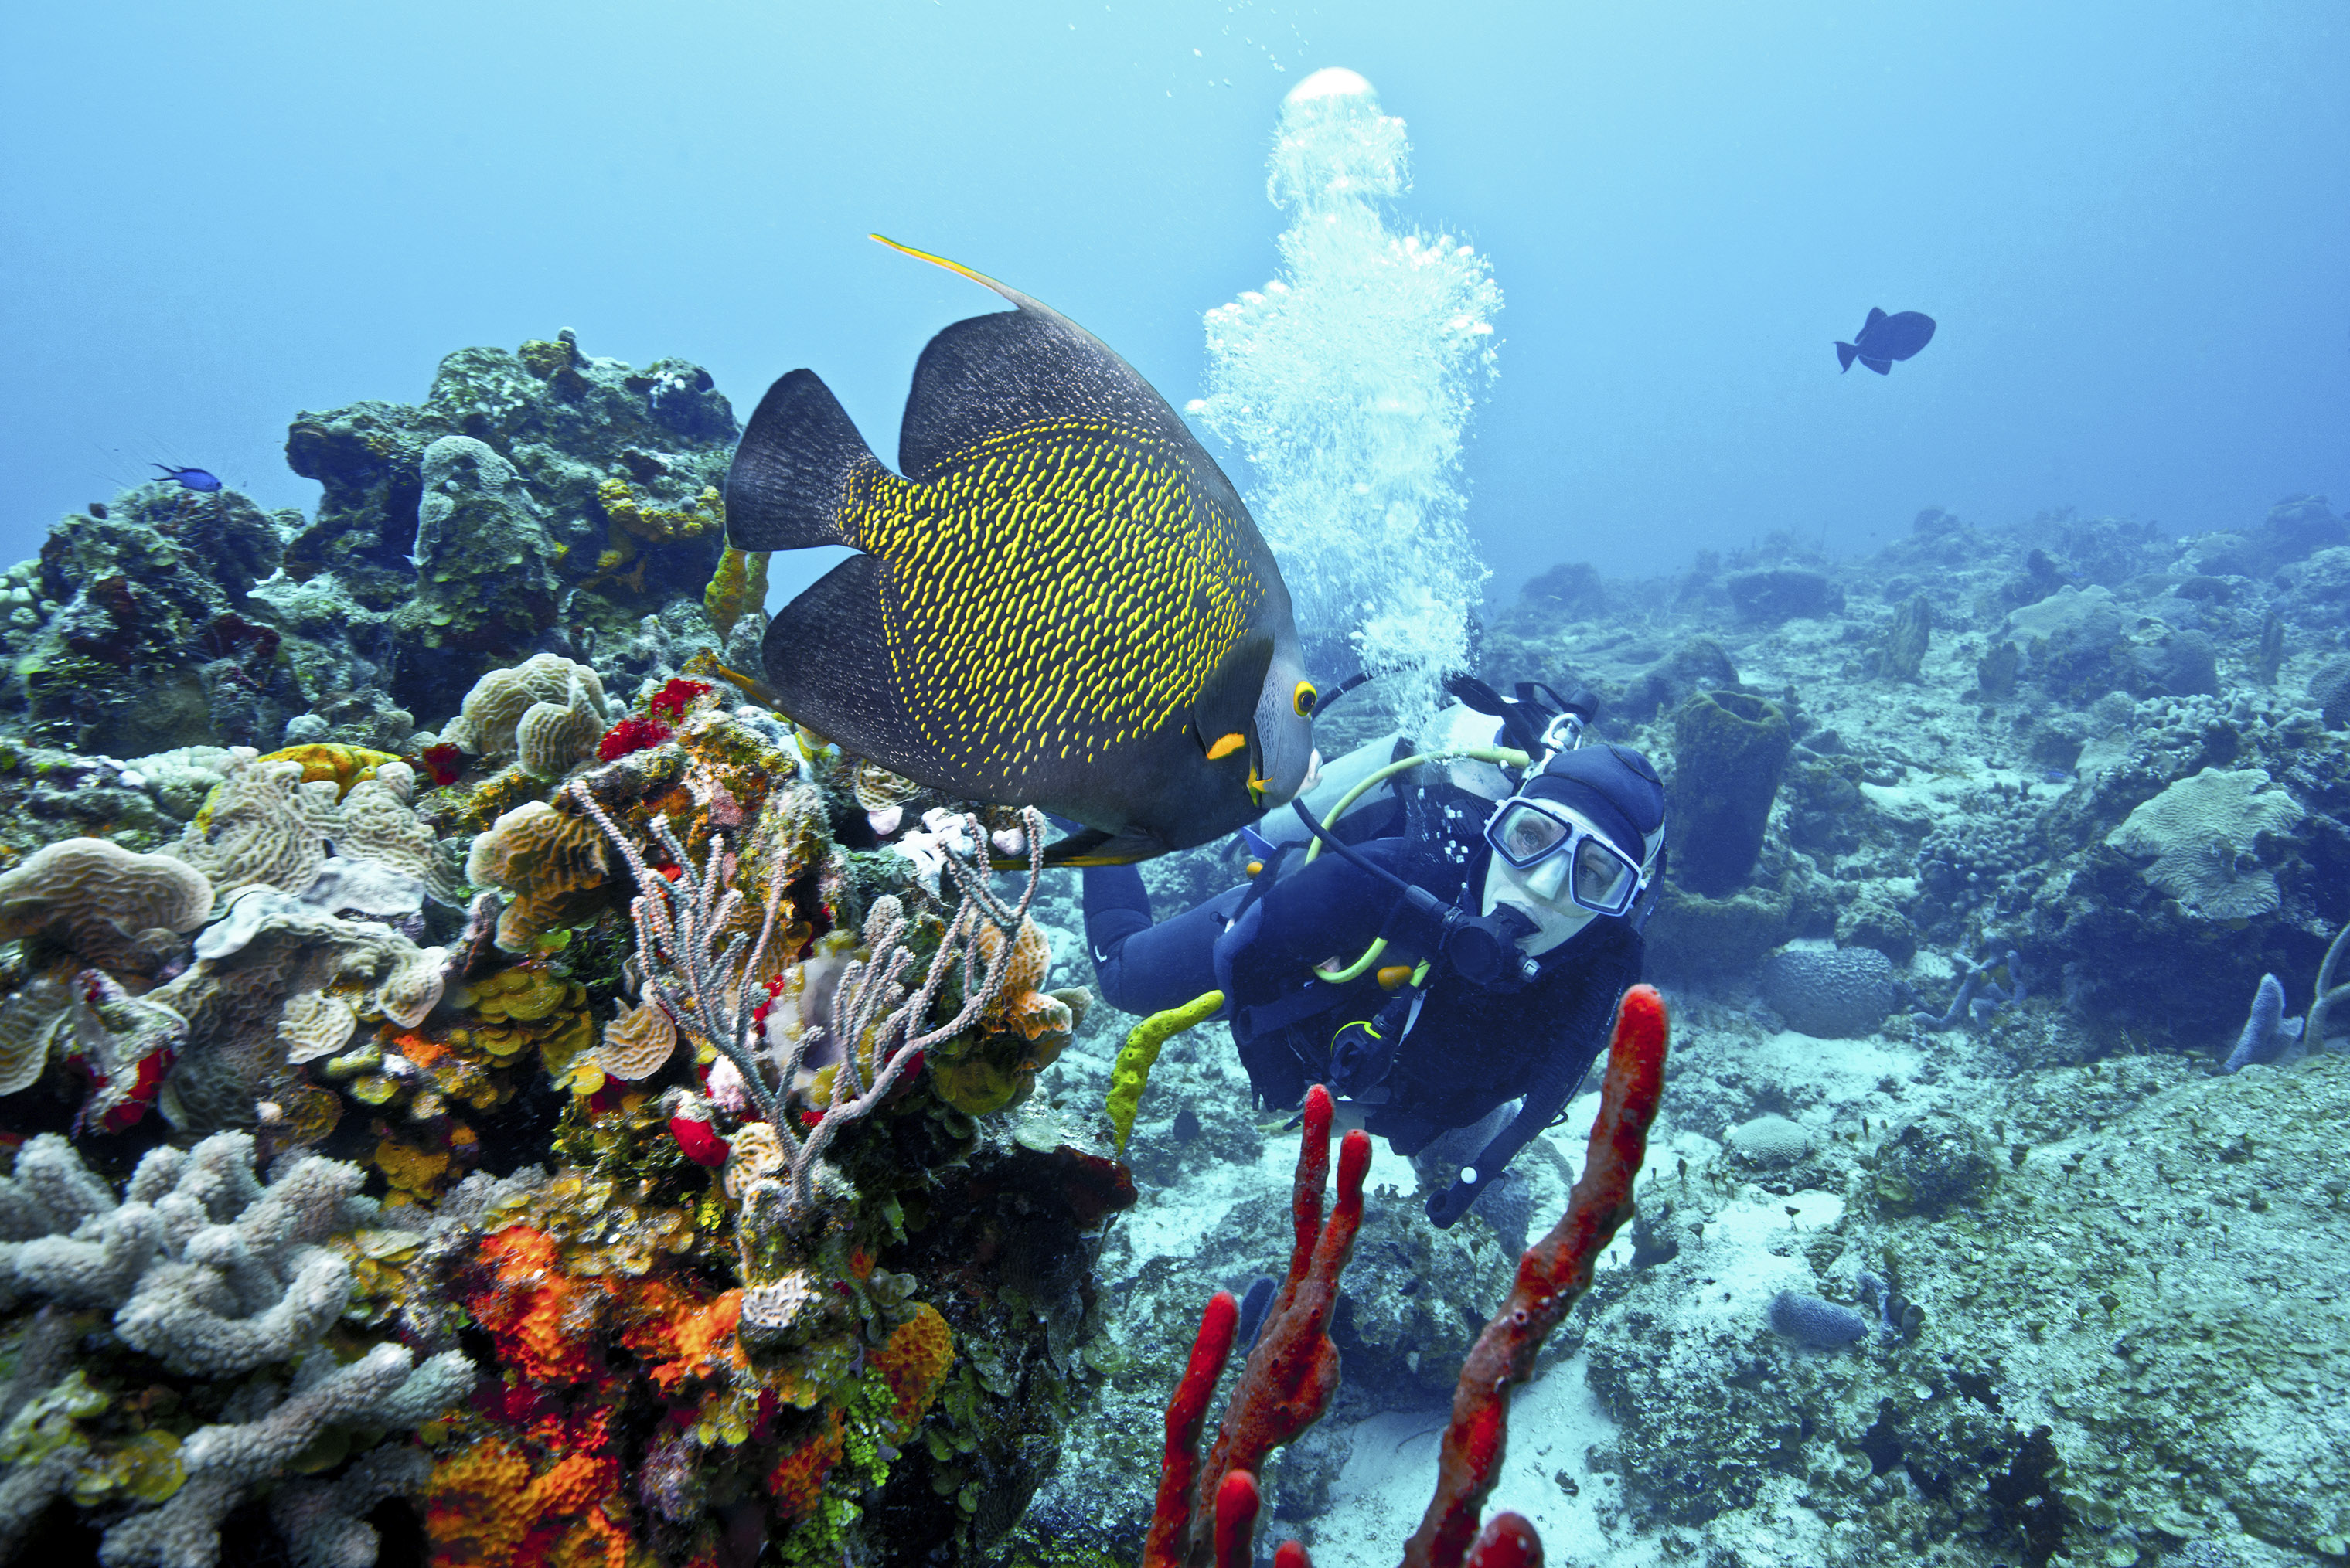 Snorkelers and divers can spot numerous sea creatures in Cozumelâ€™s waters.